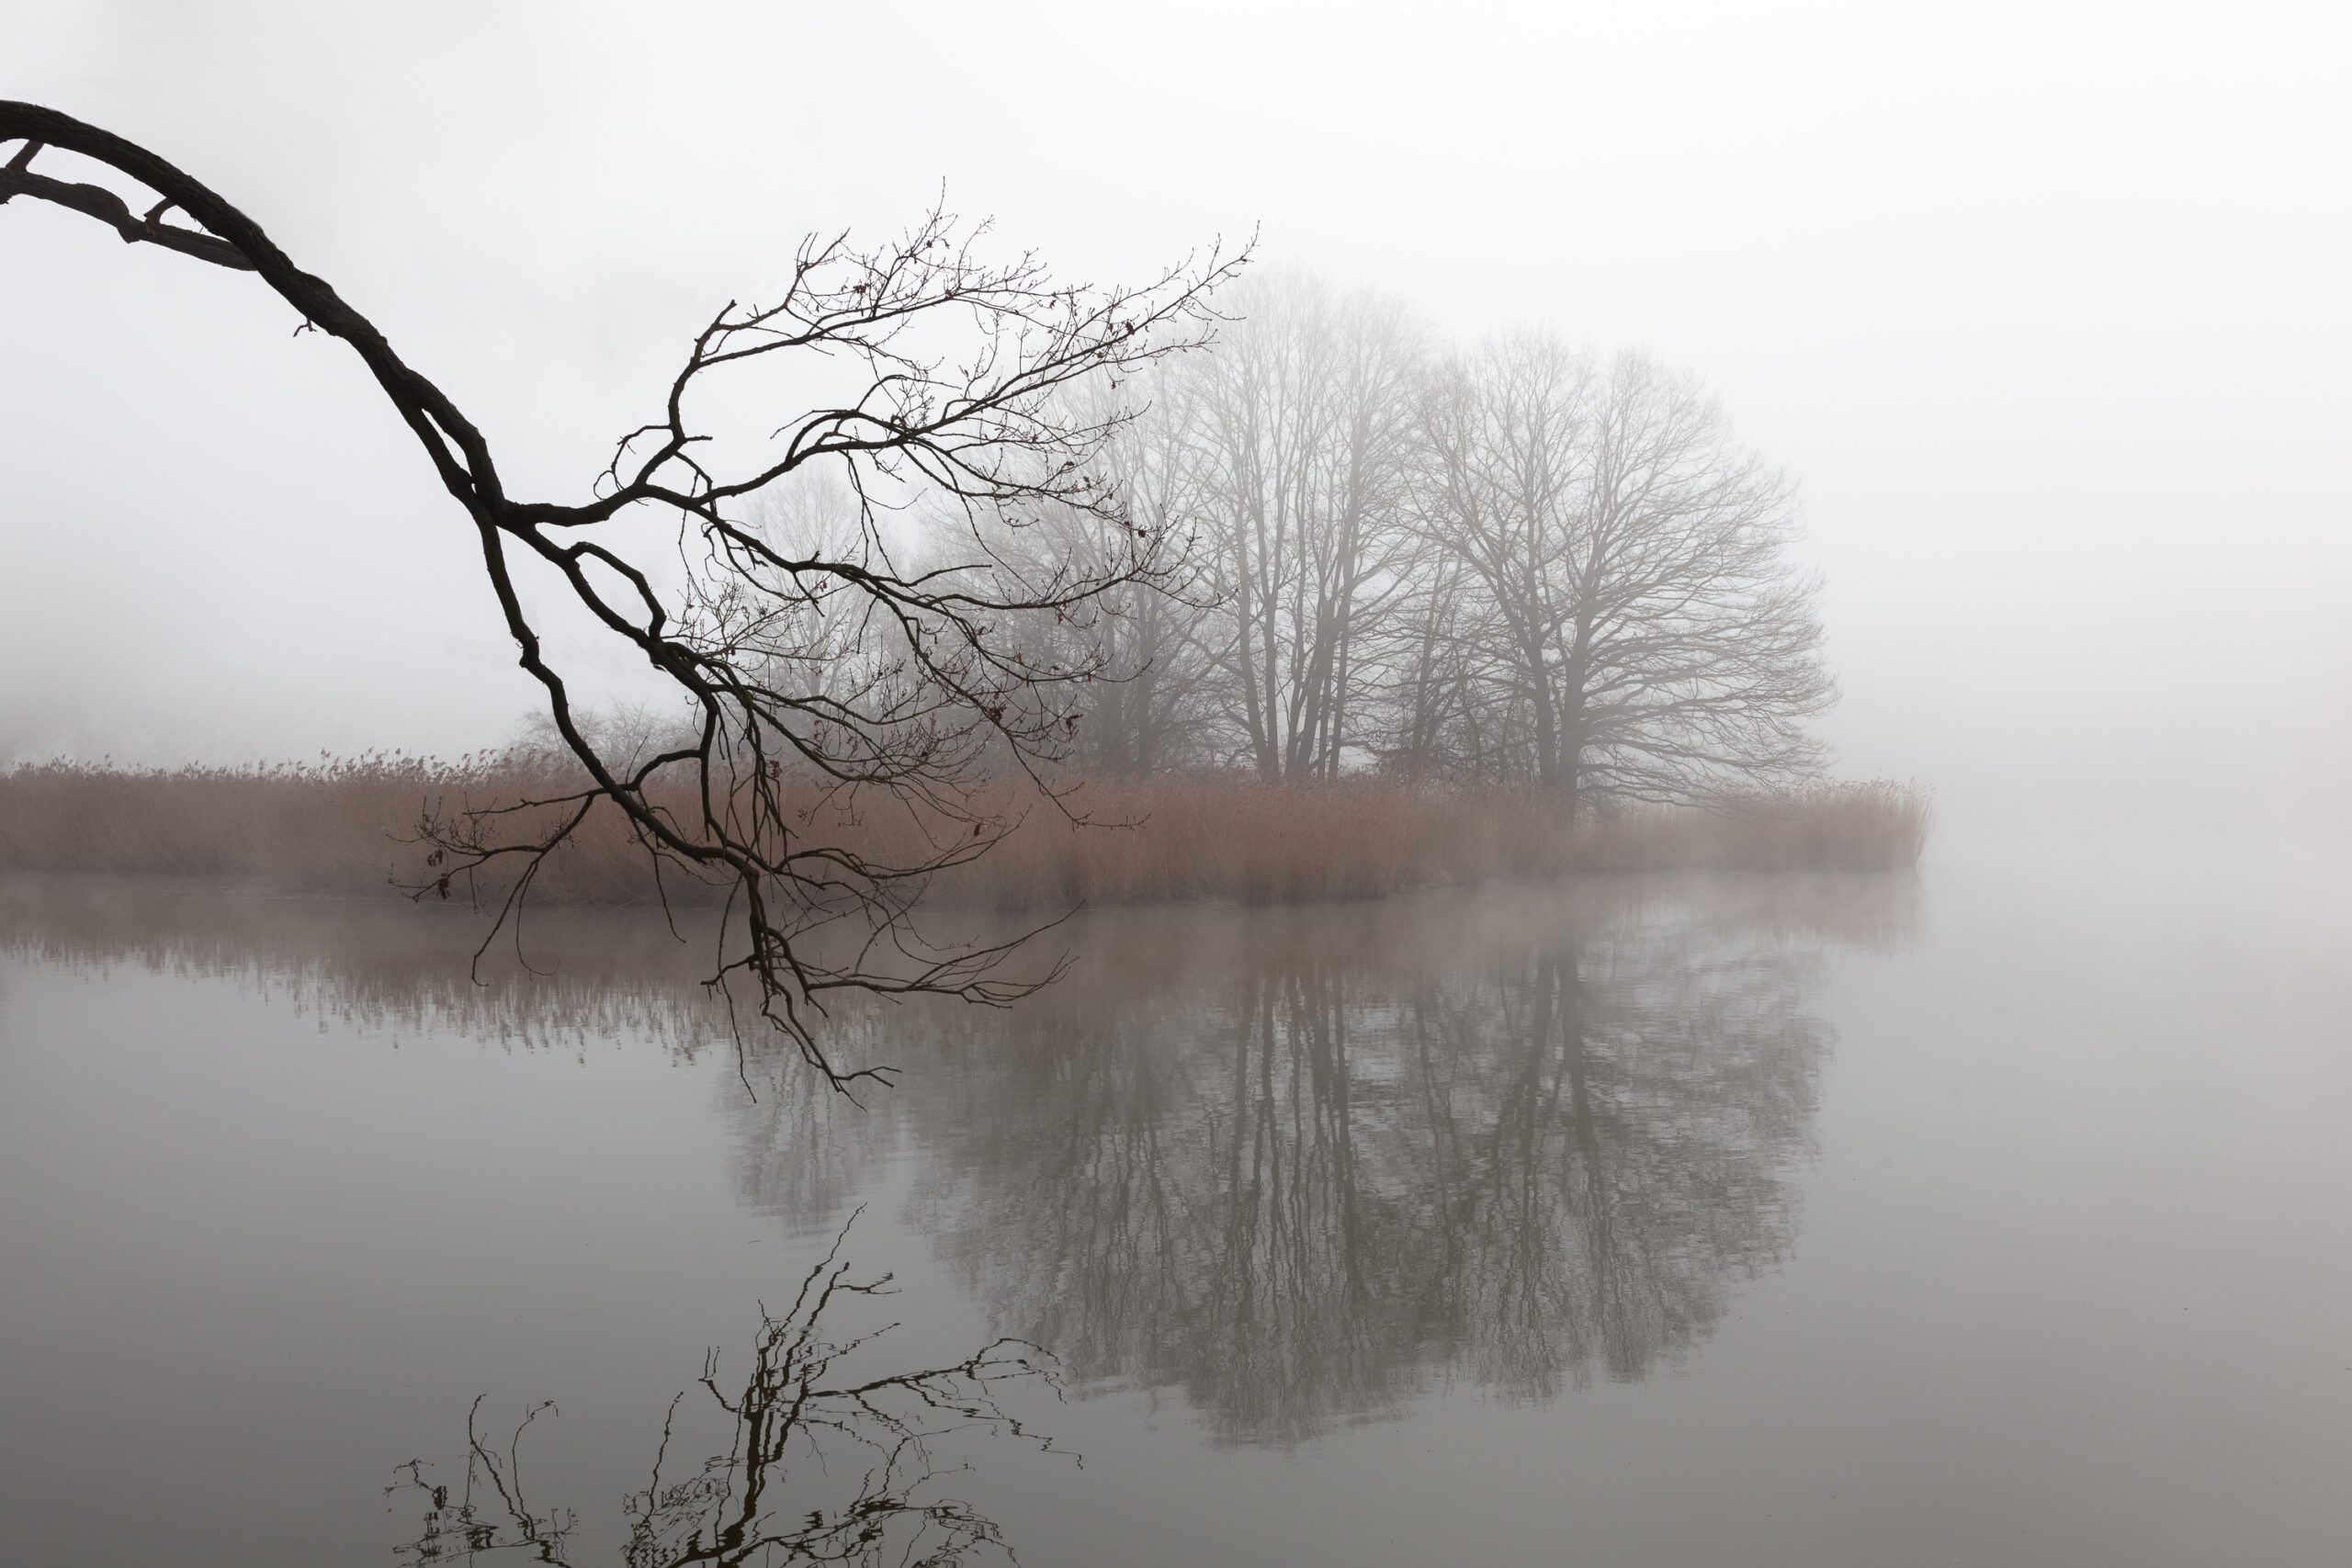 This tranquil image captures a lone island amidst a foggy lake, mirrored by bare fall branches in the Czech Republic.